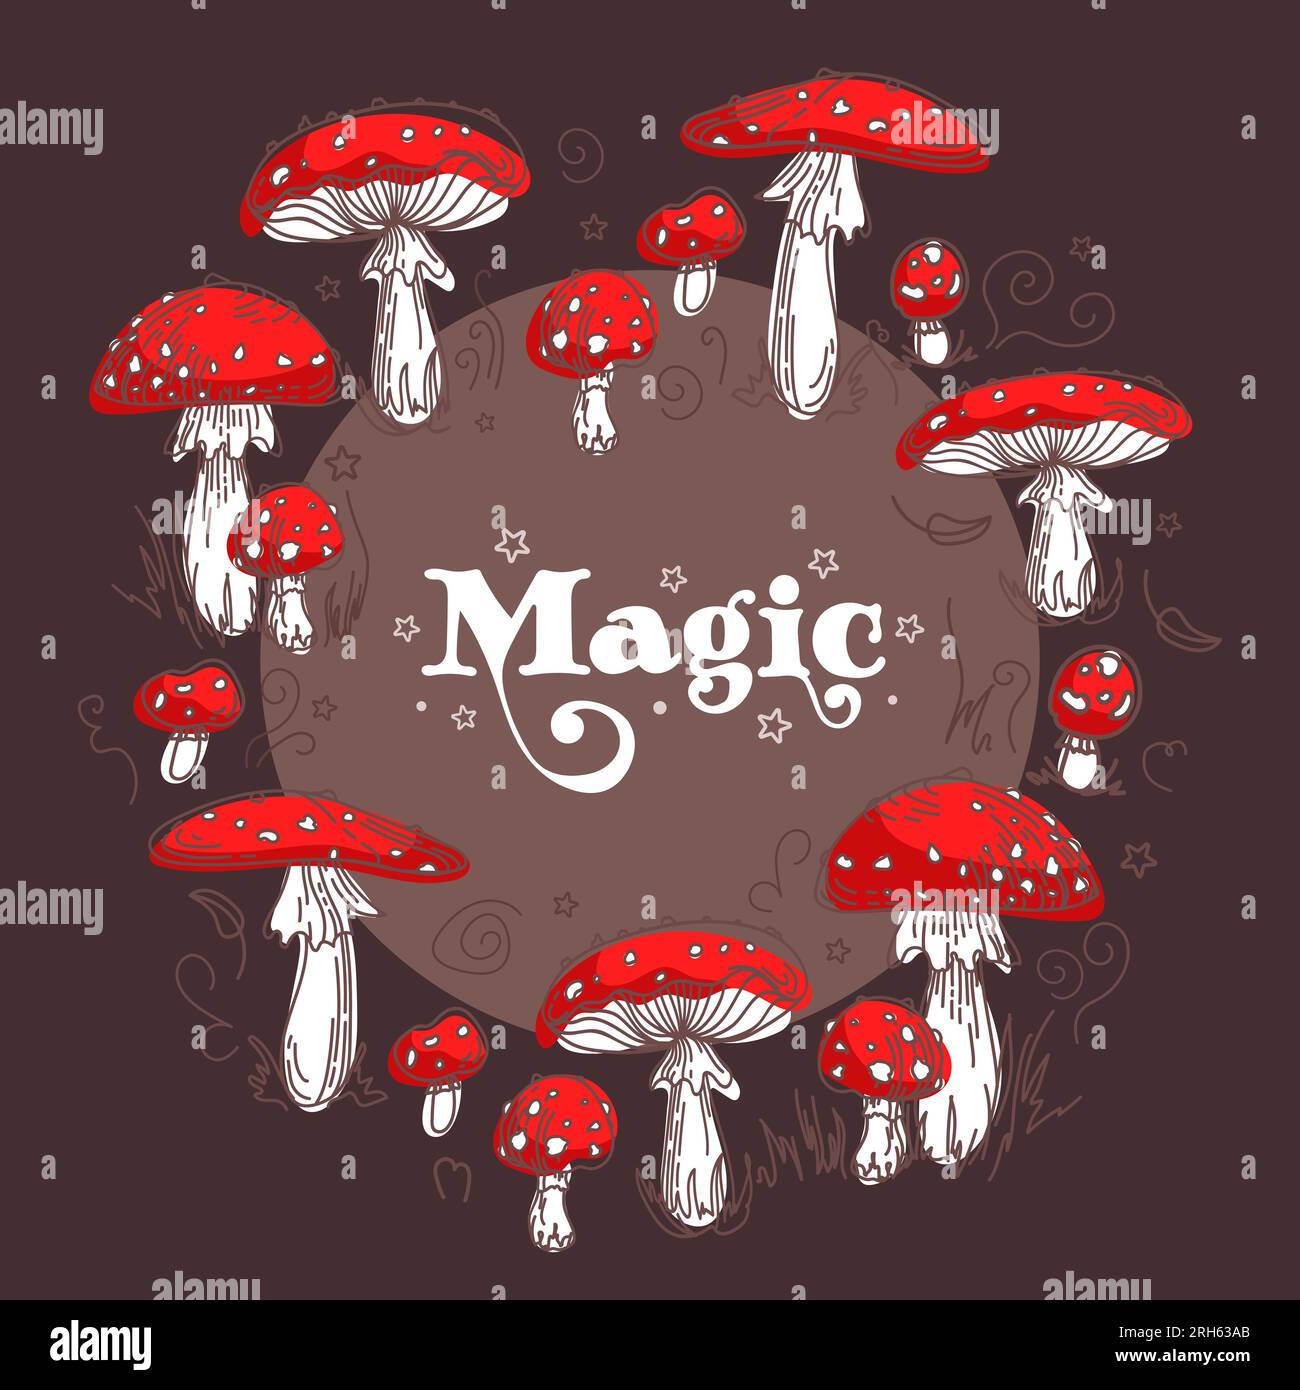 Fairy Rings. Magic witchs circle of fly agaric mushrooms. Vintage bright botanical illustration in sketch style. For halloween posters, postcards, ban Stock Vector